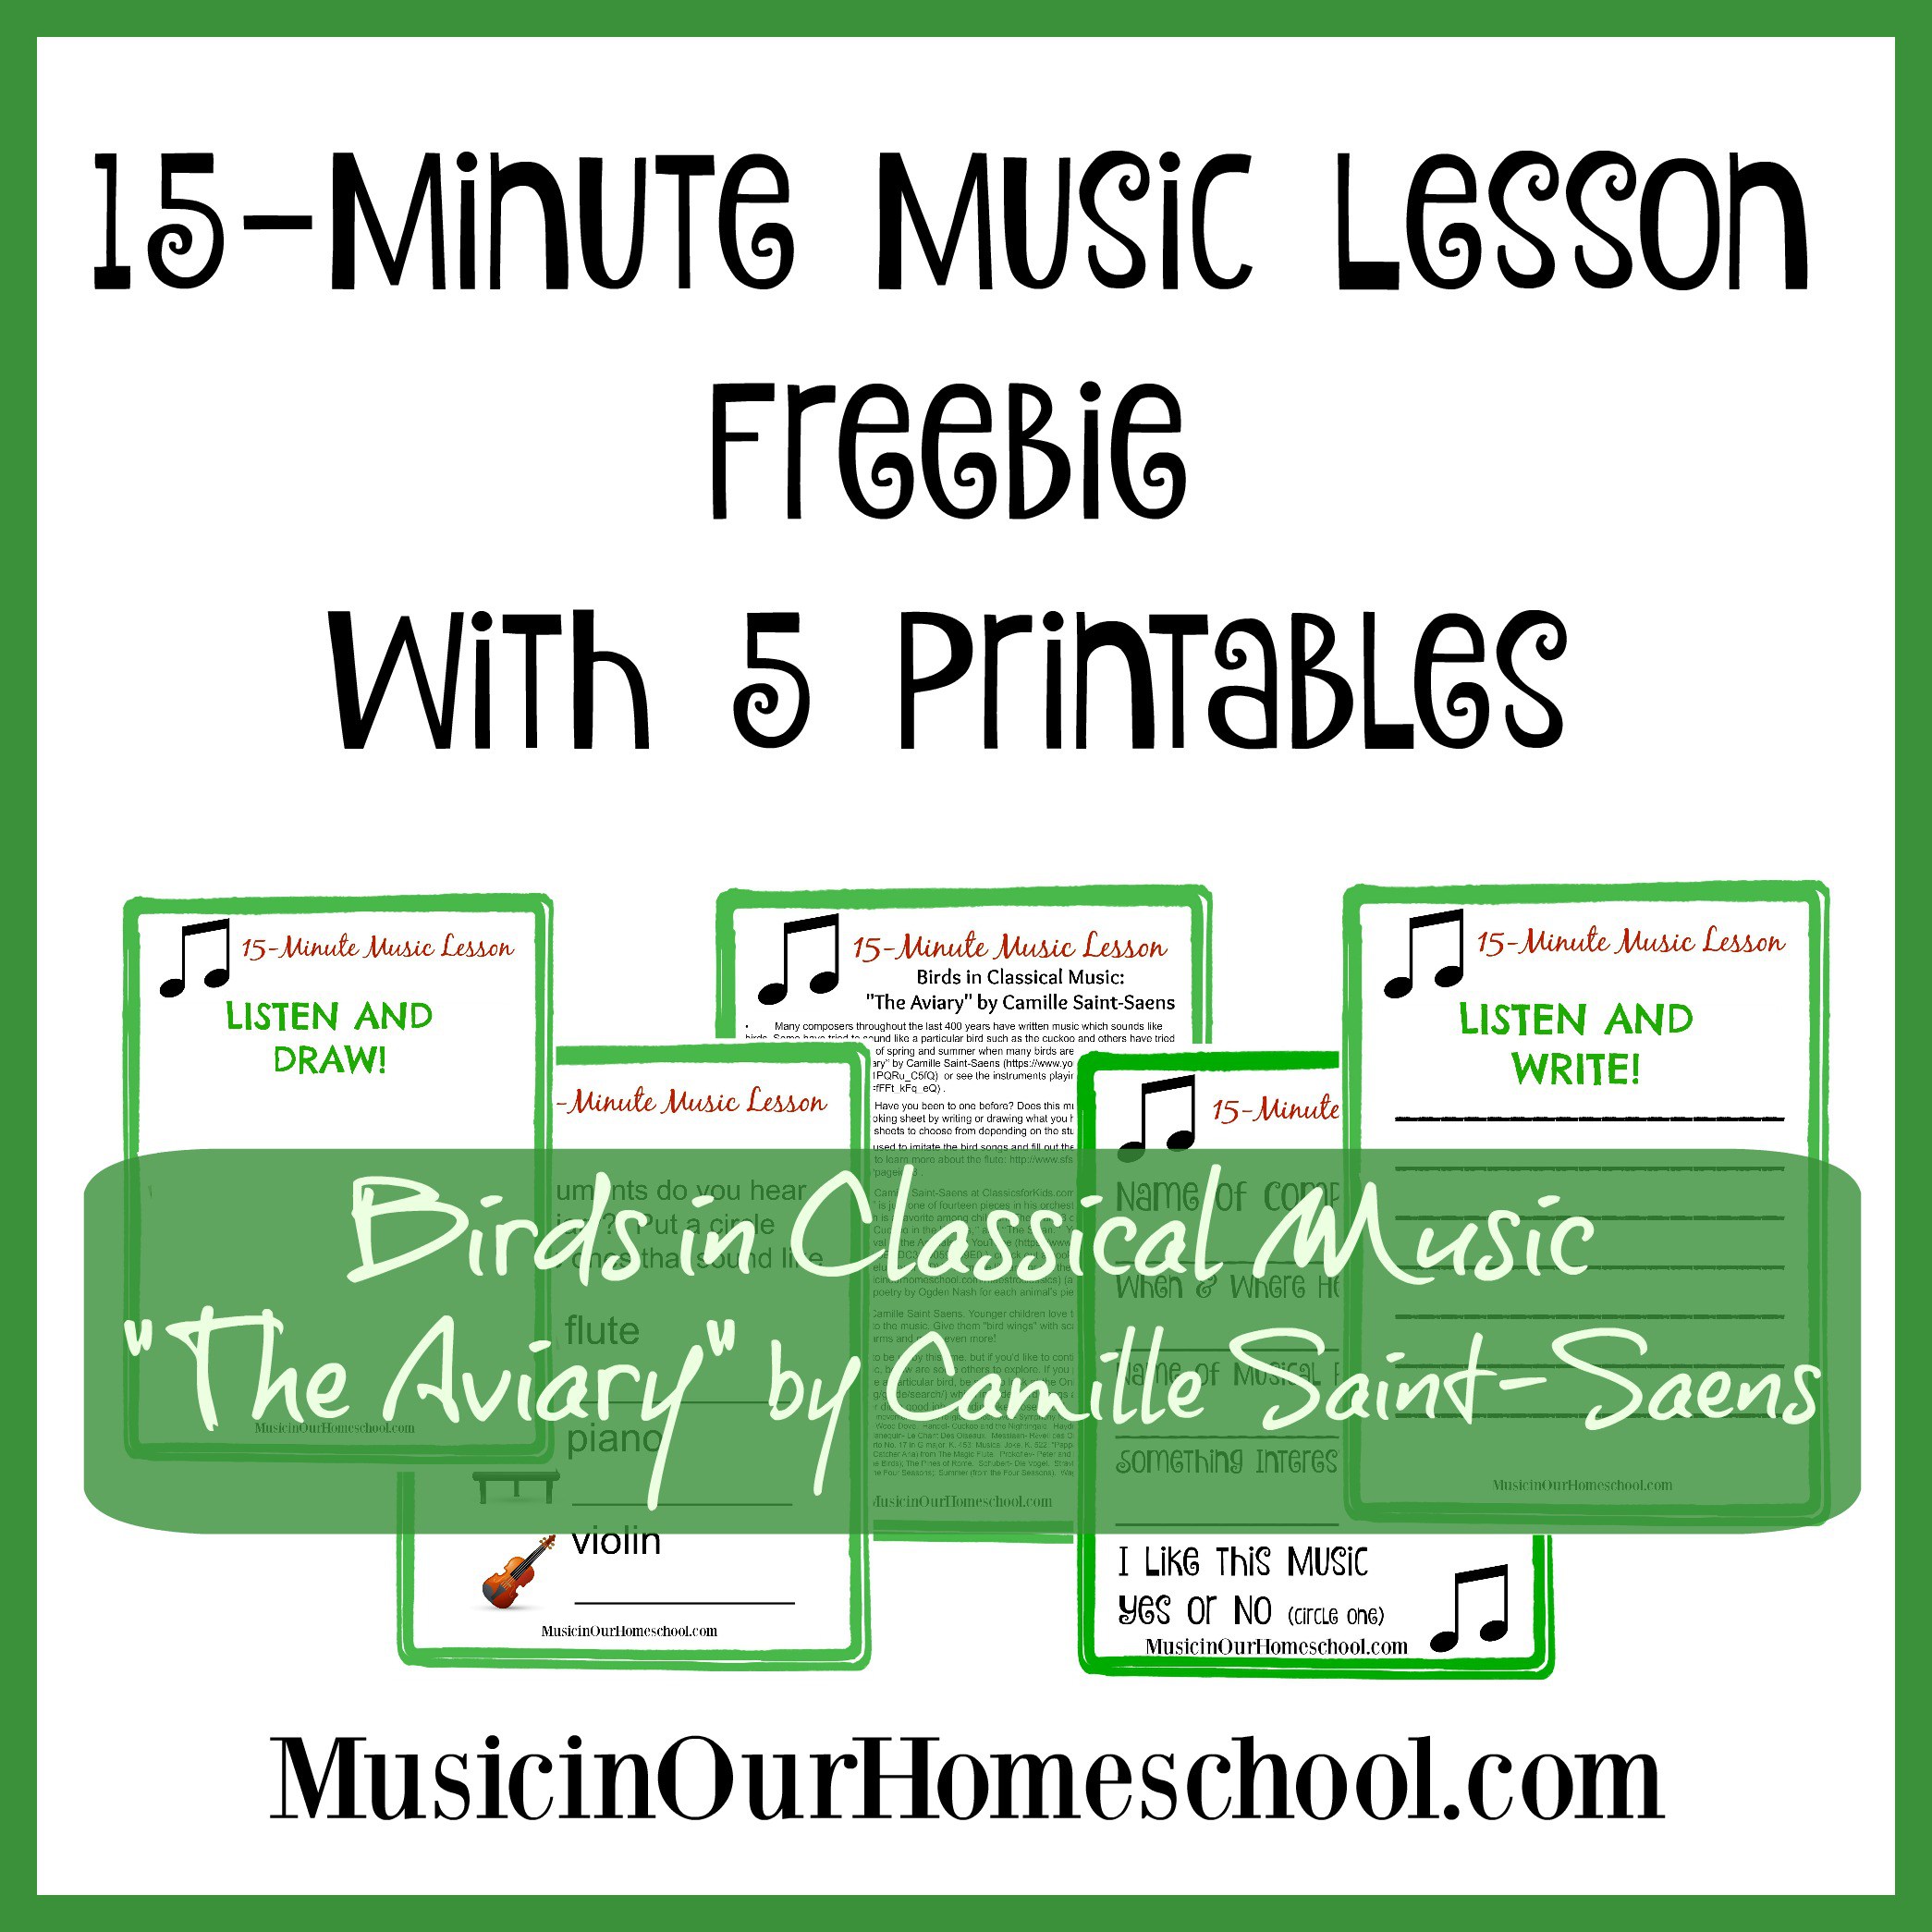 Free 15-Minute Music Lesson on Birds in Classical Music (with printables)